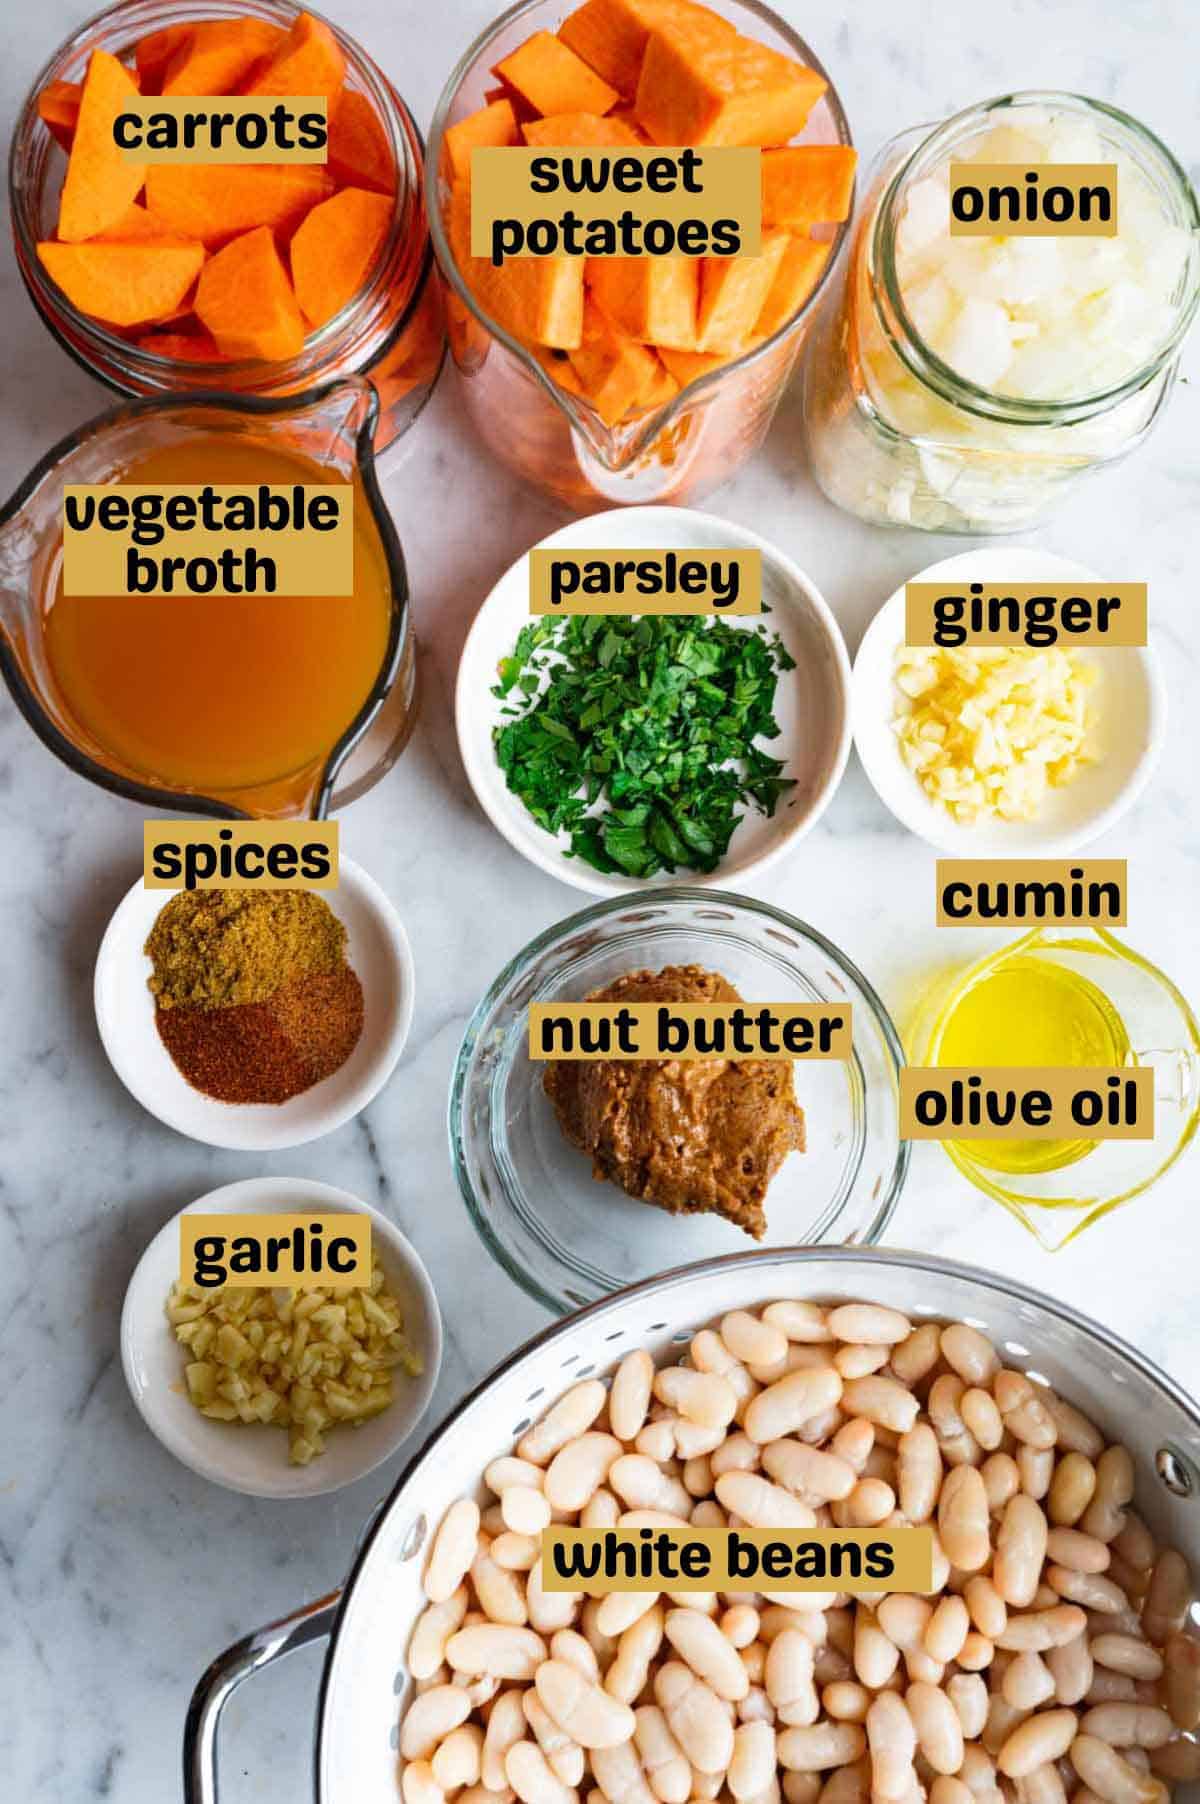 Chopped carrots, sweet potato, onion, garlic, ginger, and parsley, spices, nut butter, olive oil, and vegetable broth in glass jars with a colander of white beans.